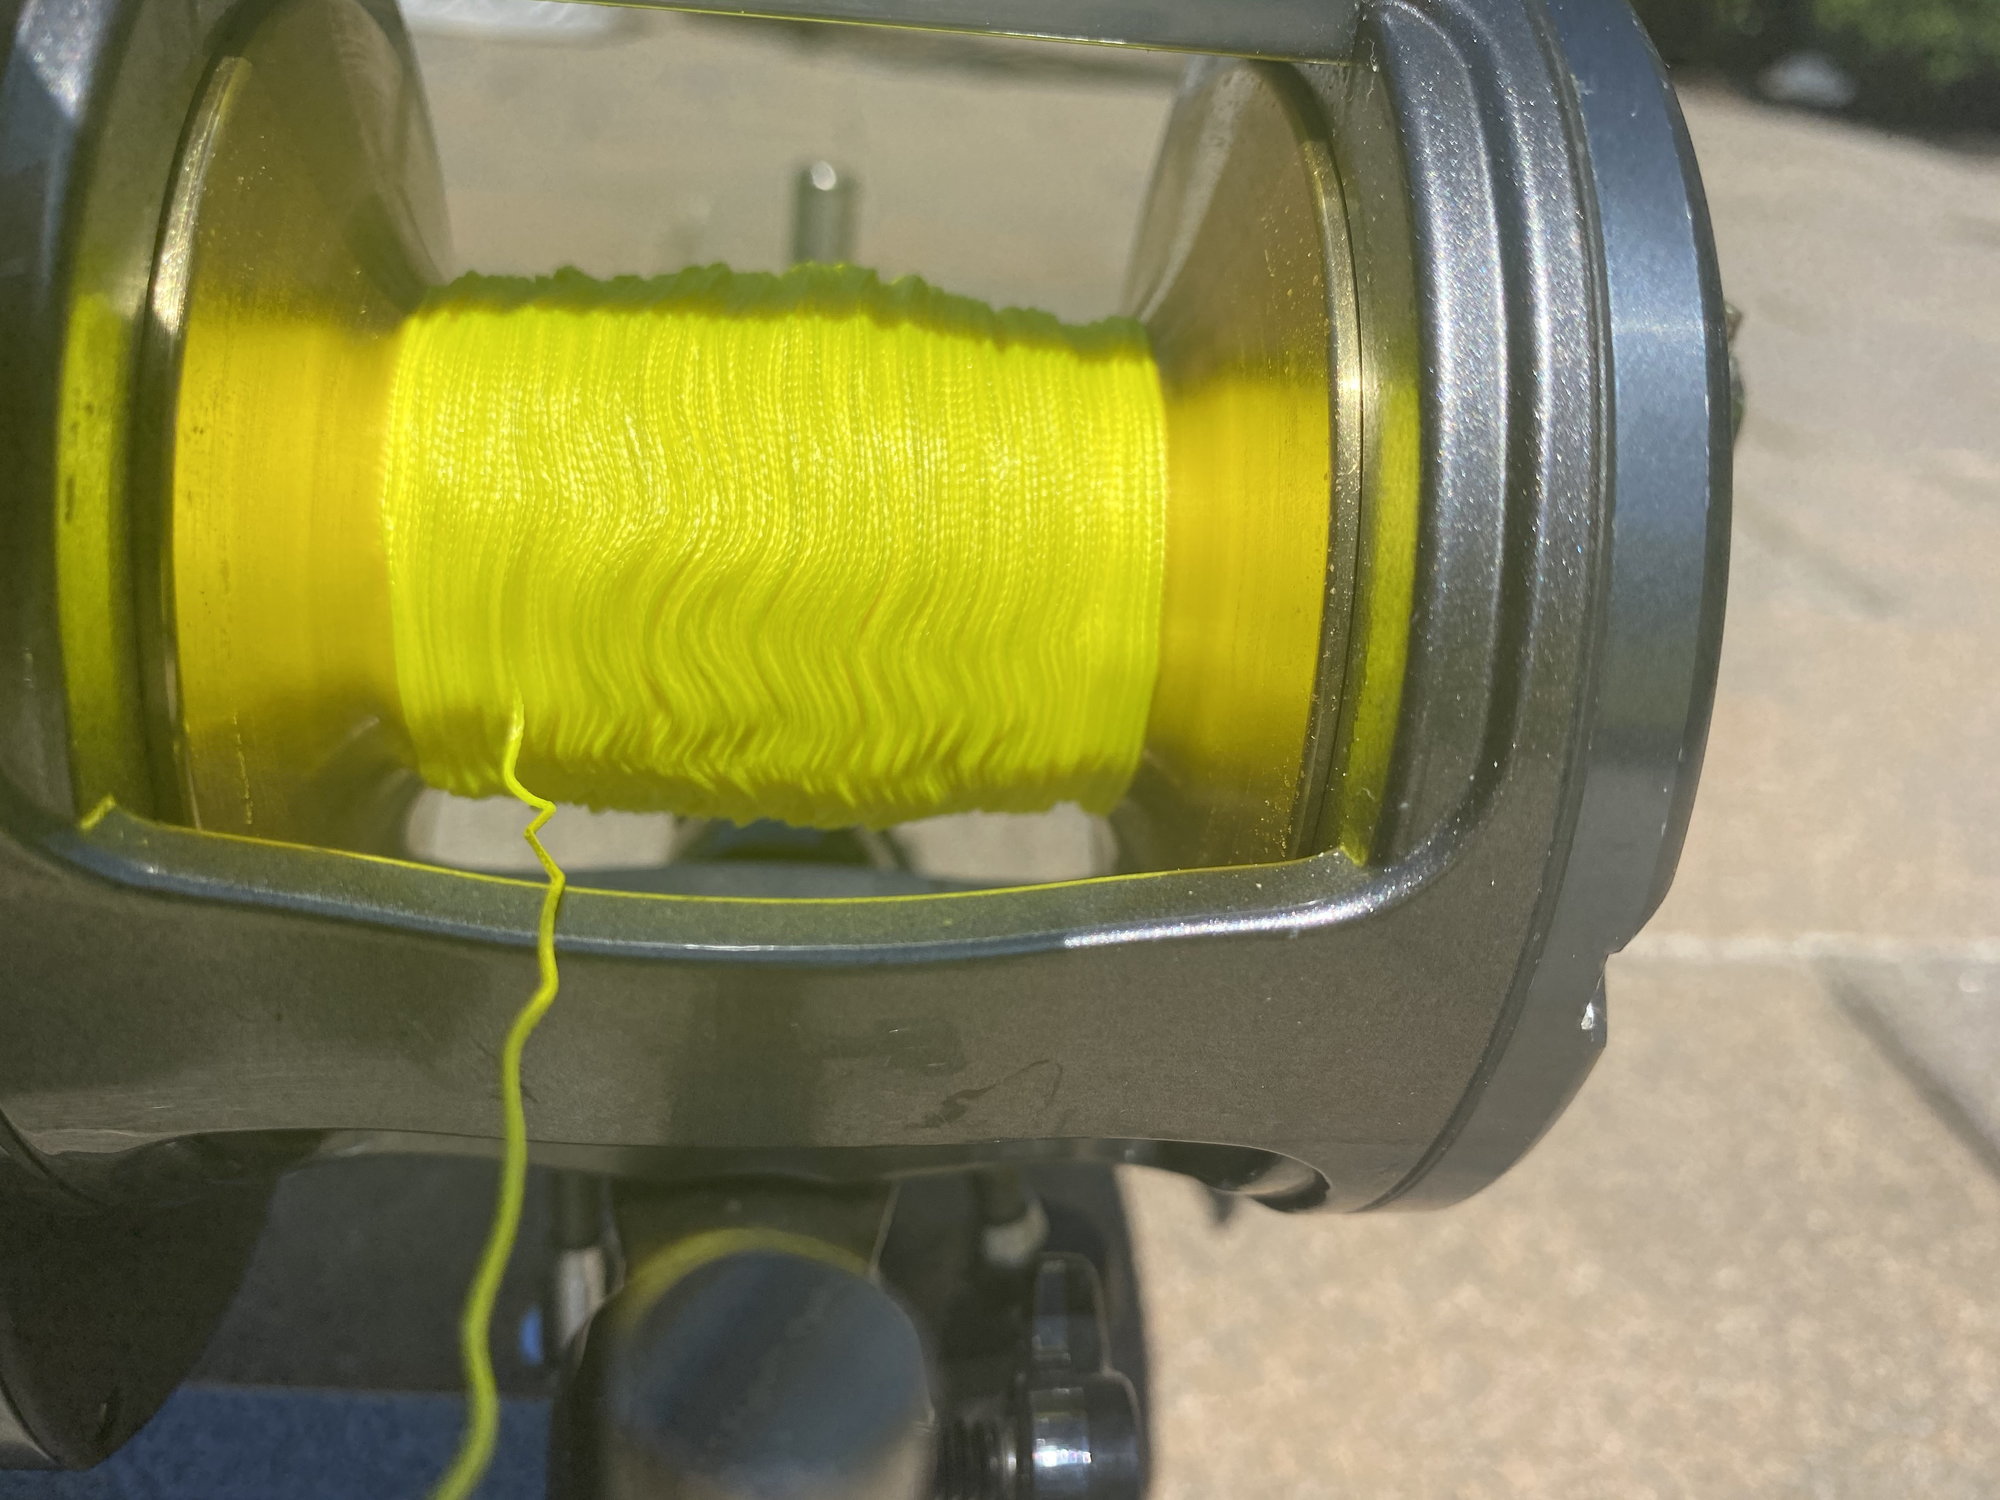 How to Spool a Fishing Reel